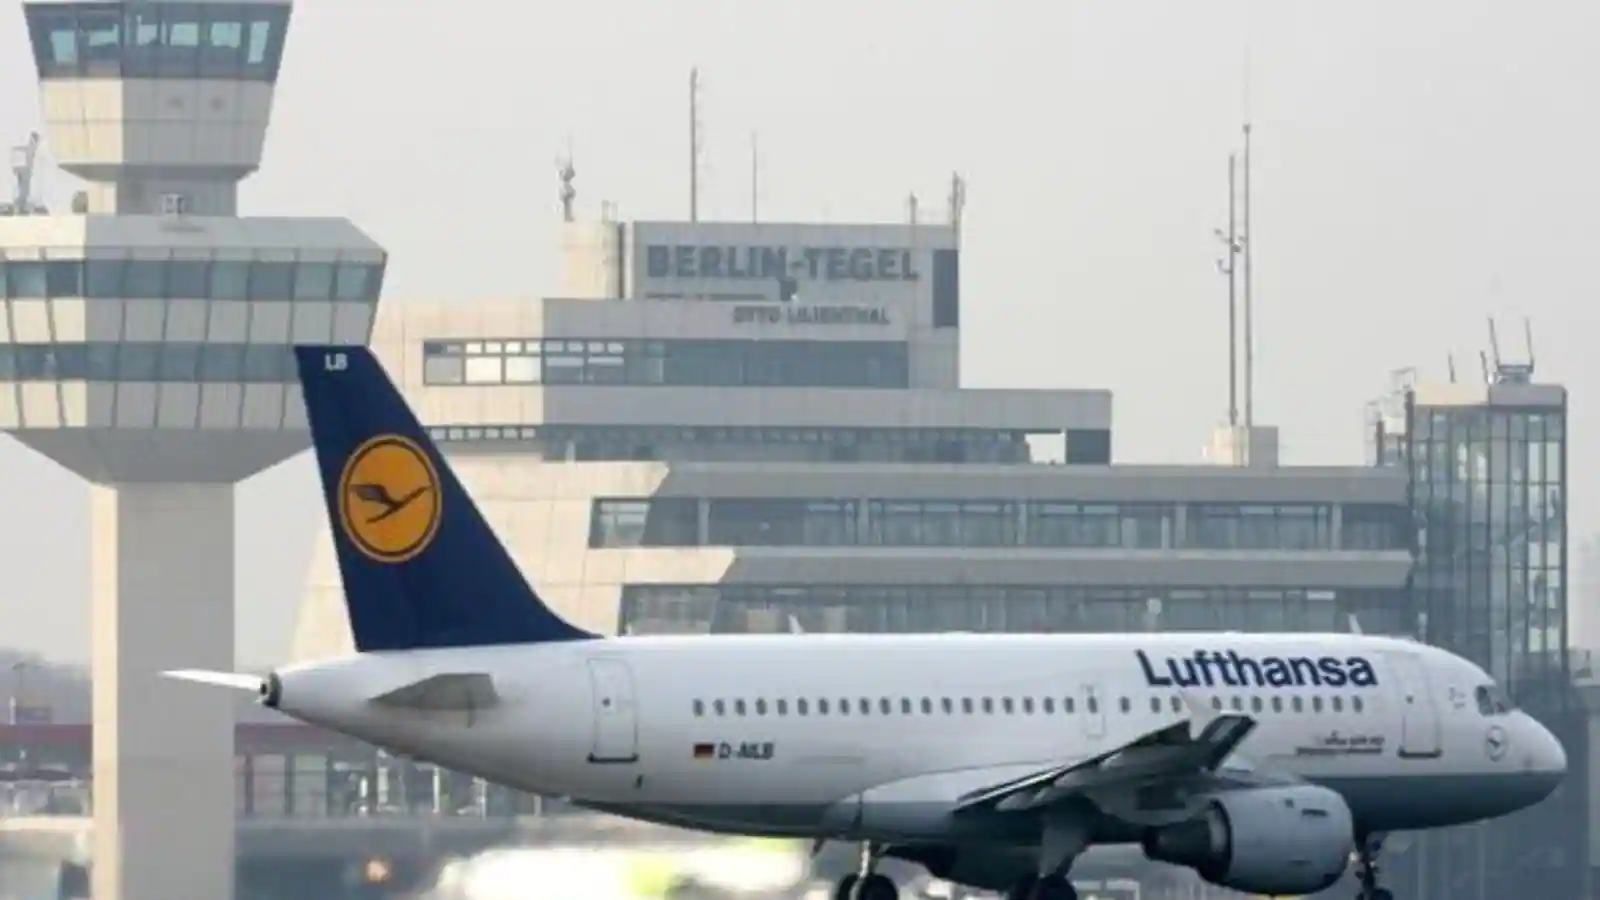 Lufthansa repaid all the state's corona aid earlier than planned